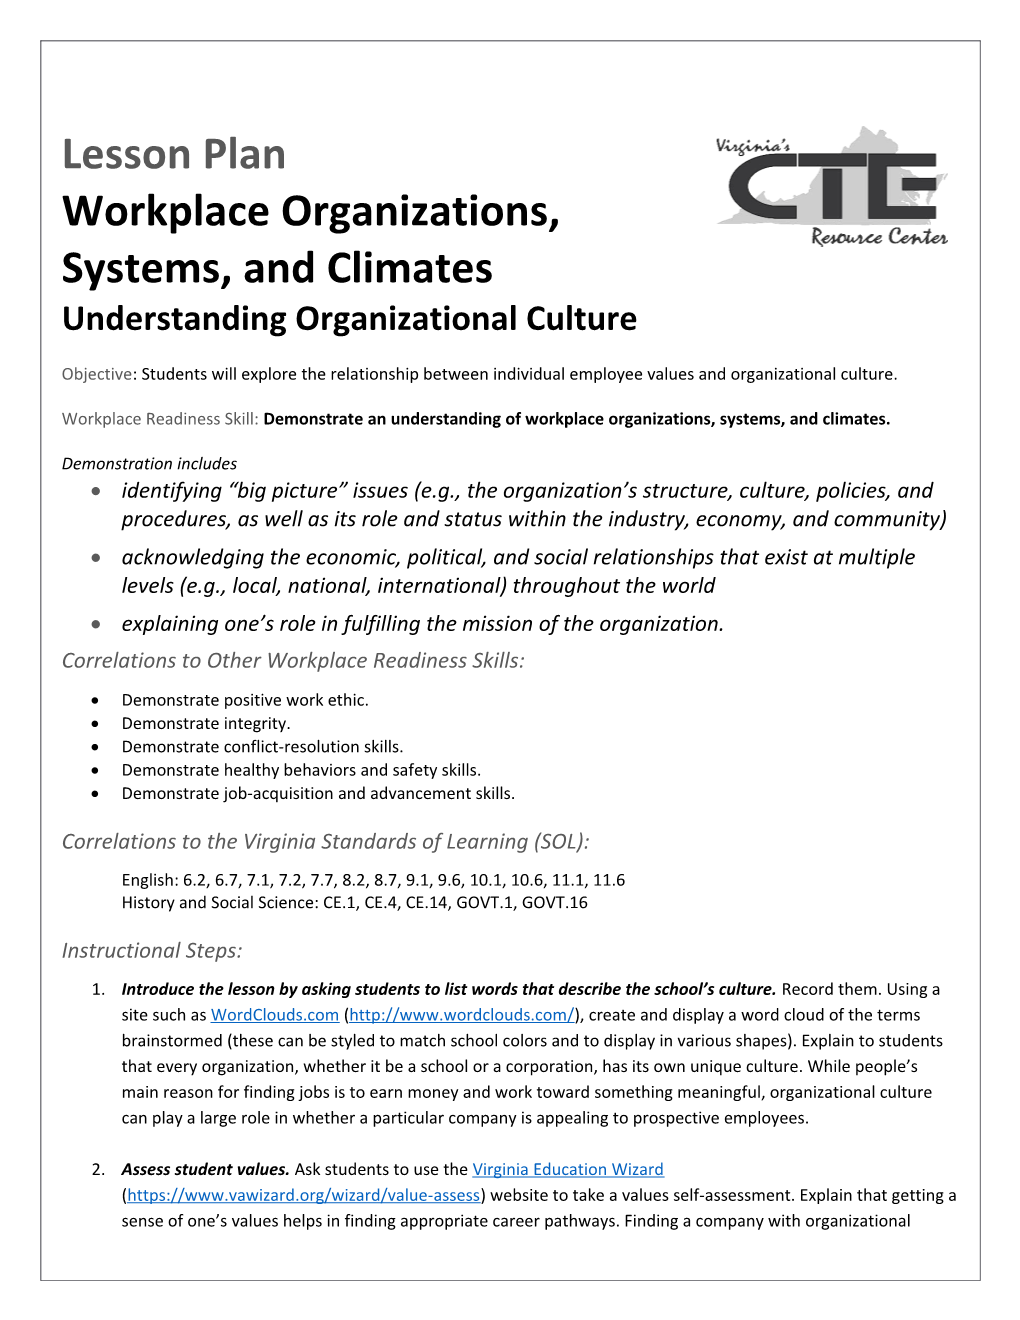 Workplace Organizations, Systems, and Climates